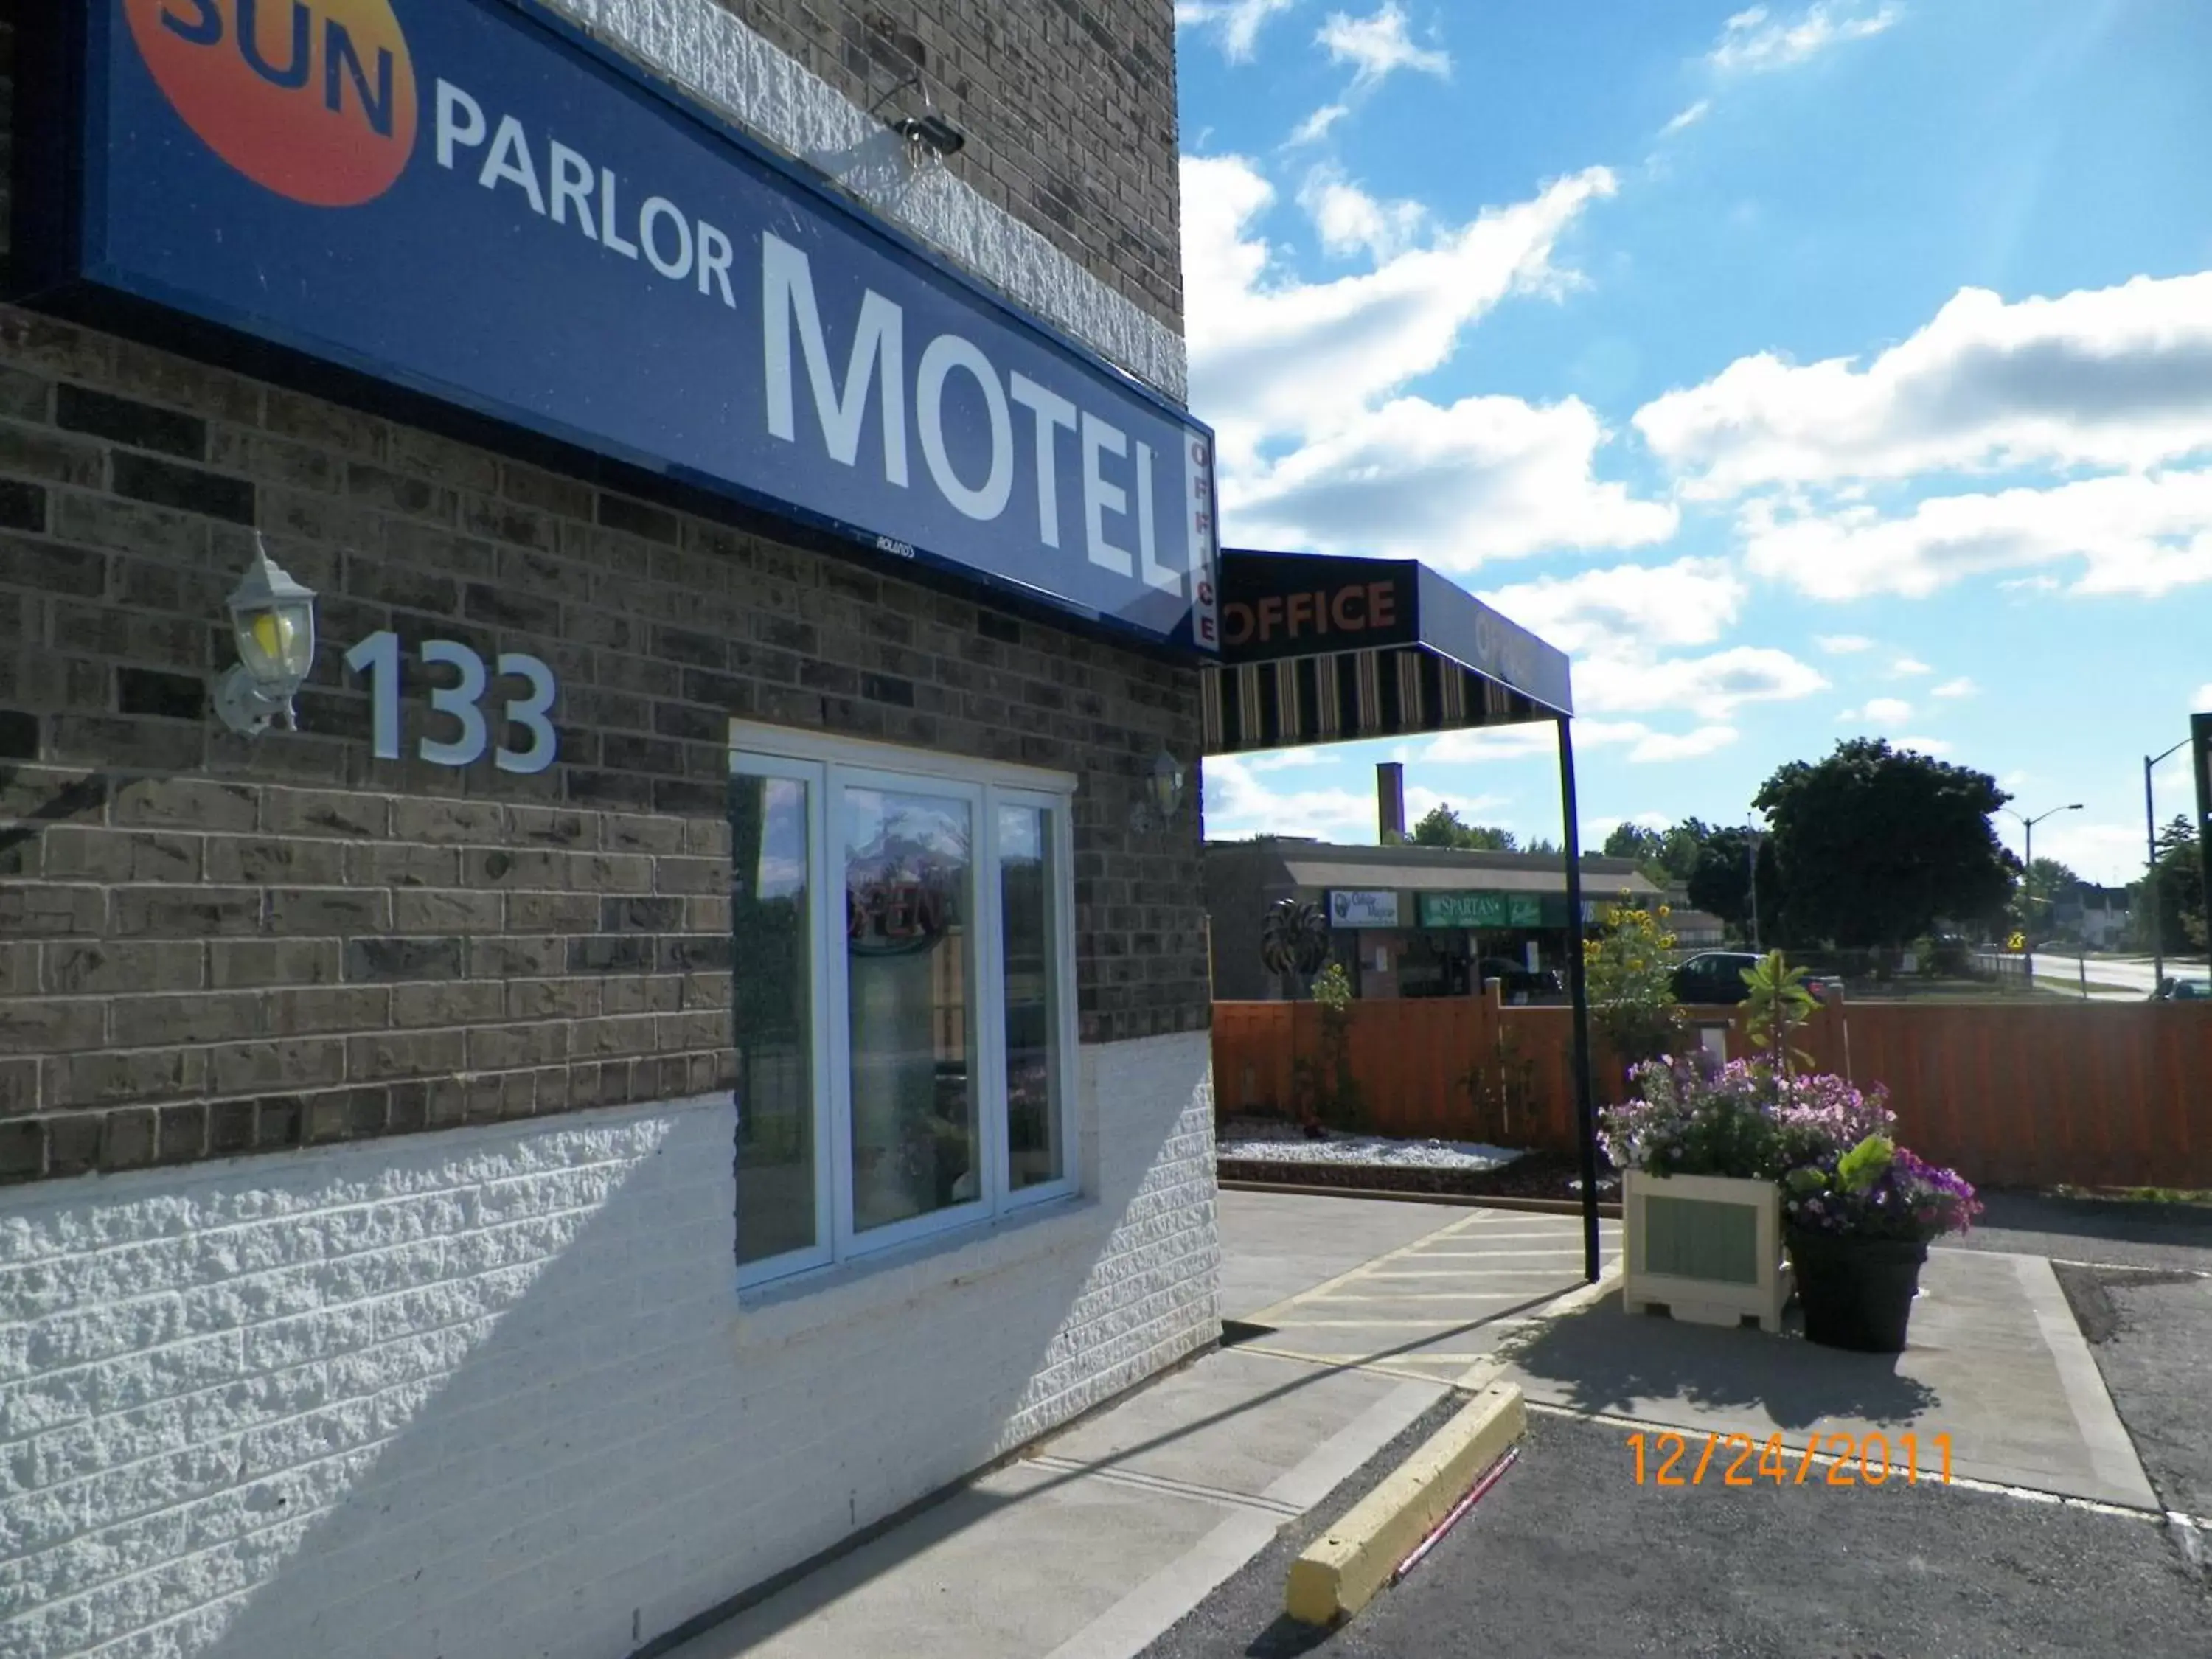 Property Building in Sunparlor Motel